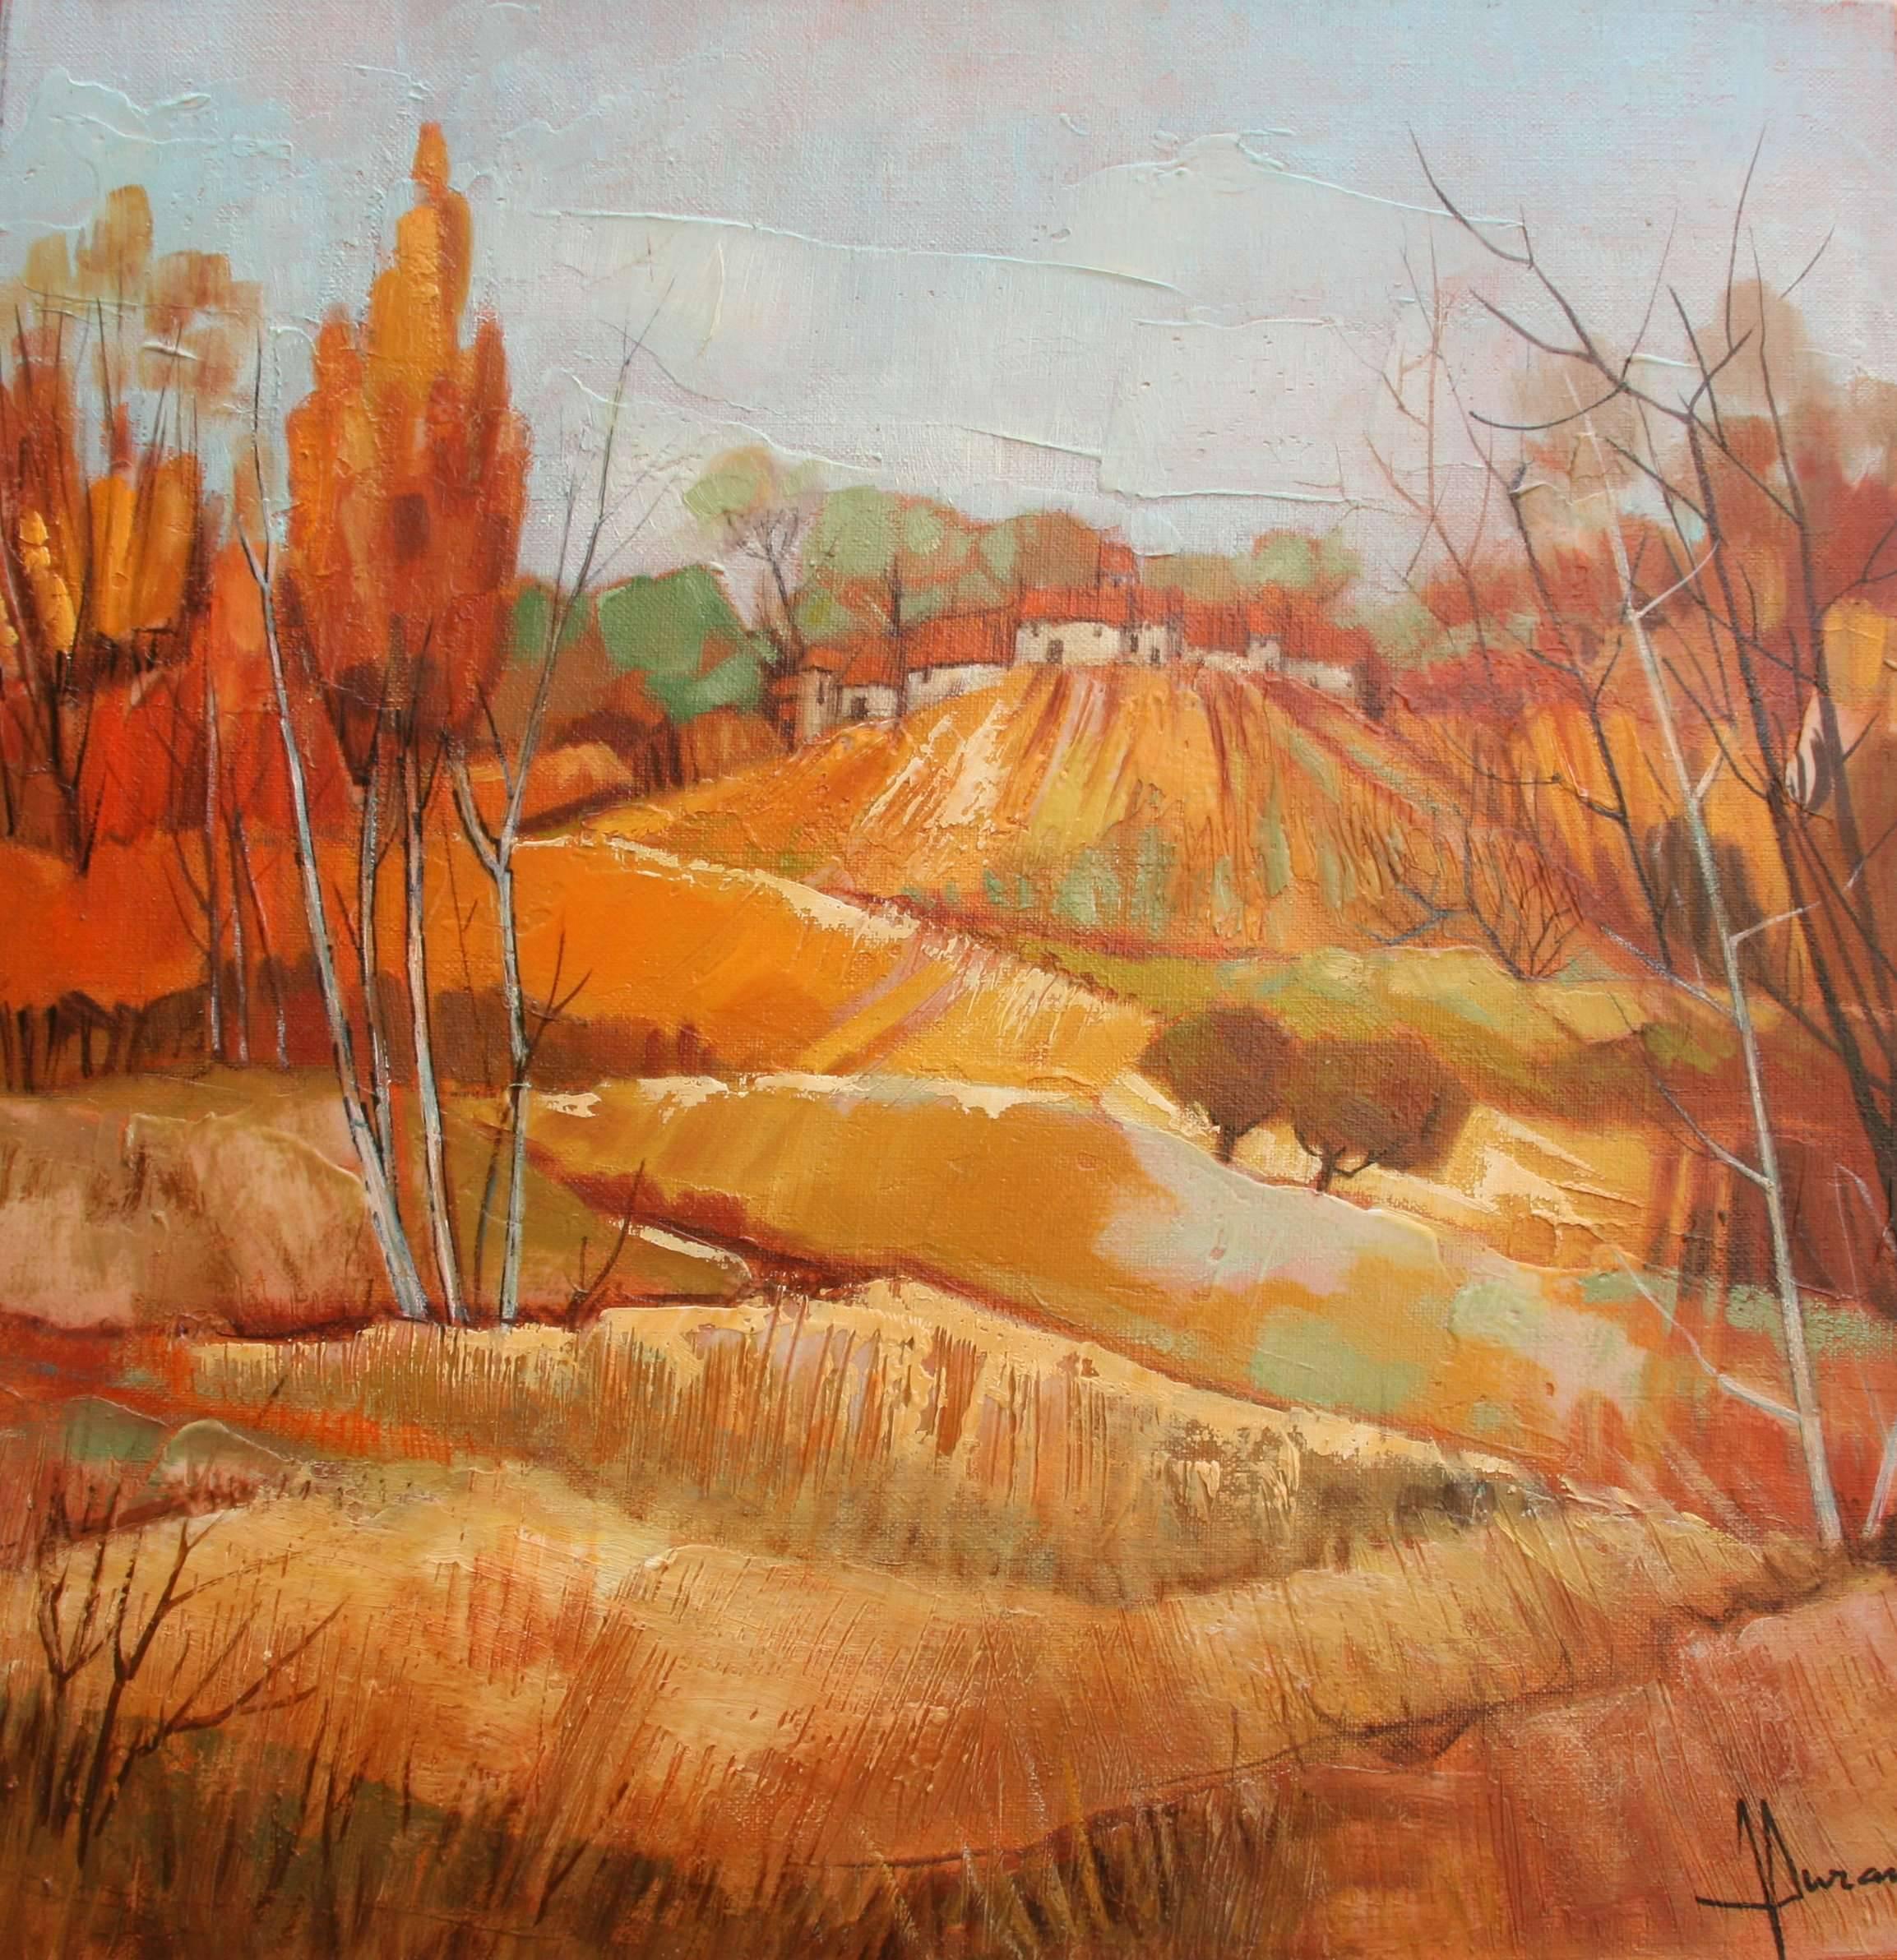 The hamlet, oil on canvas by French artist Jori Duran.
Dimension 50 cm H x 50 cm W x 2 cm D
This painting is not framed.
Ask us if you need a shorter  shipping time.

In this Autumn landscape we can appreciate very well her excellent stroke of the